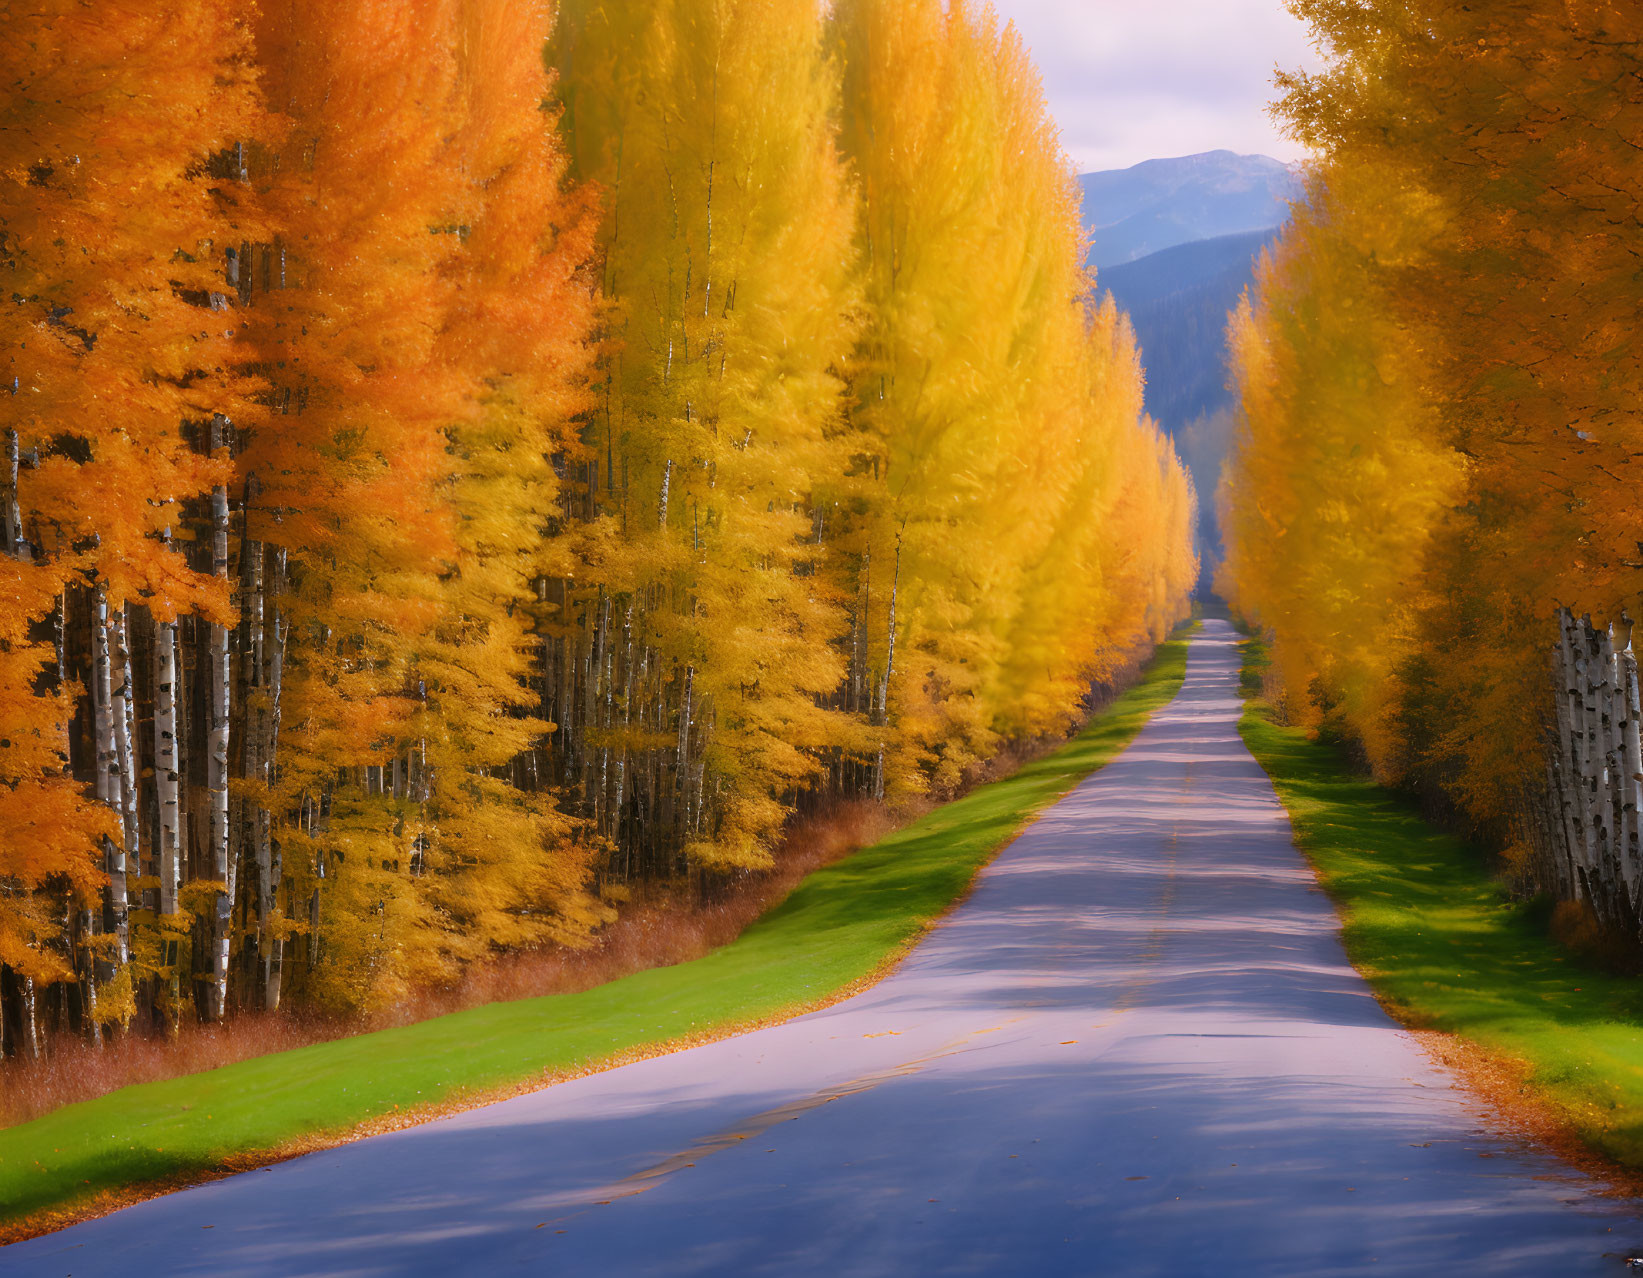 Golden Trees Lining Road in Autumn Landscape with Mountains